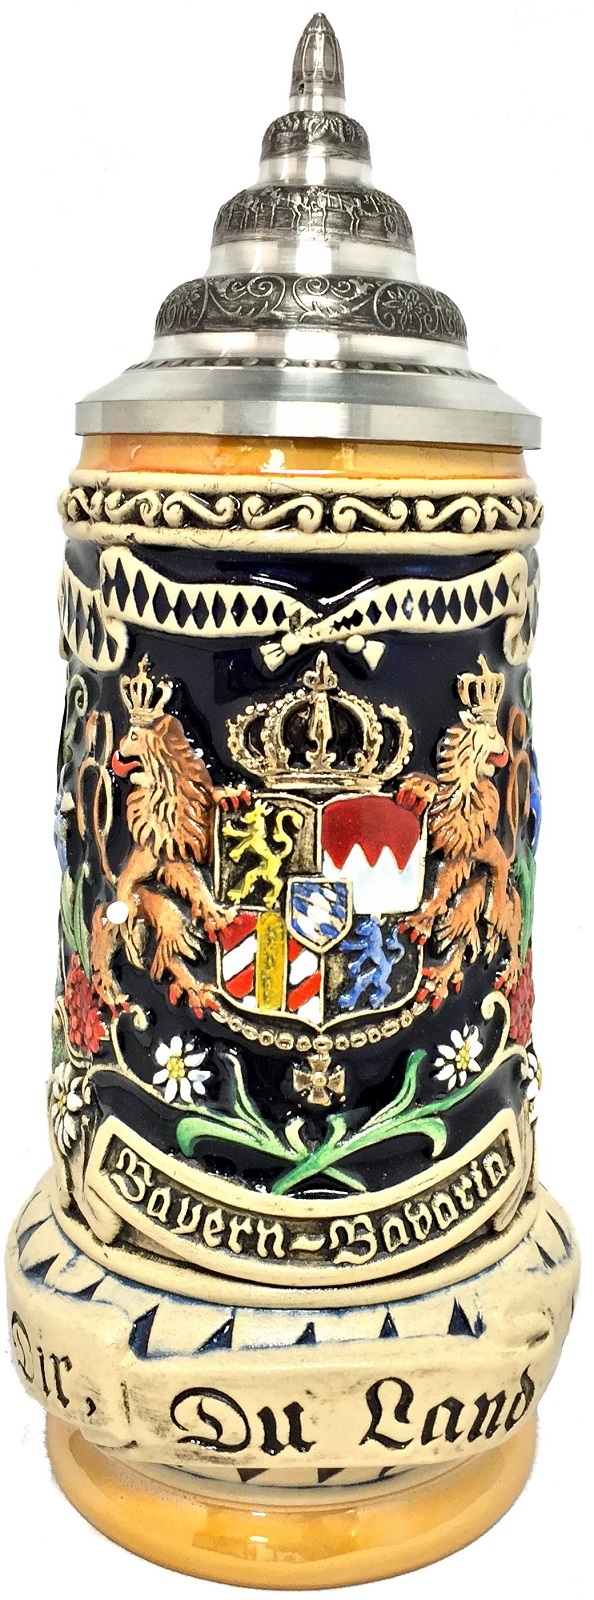 Bayern Bavaria Coat of Arms Relief LE German Beer Stein .5 L Made in Germany